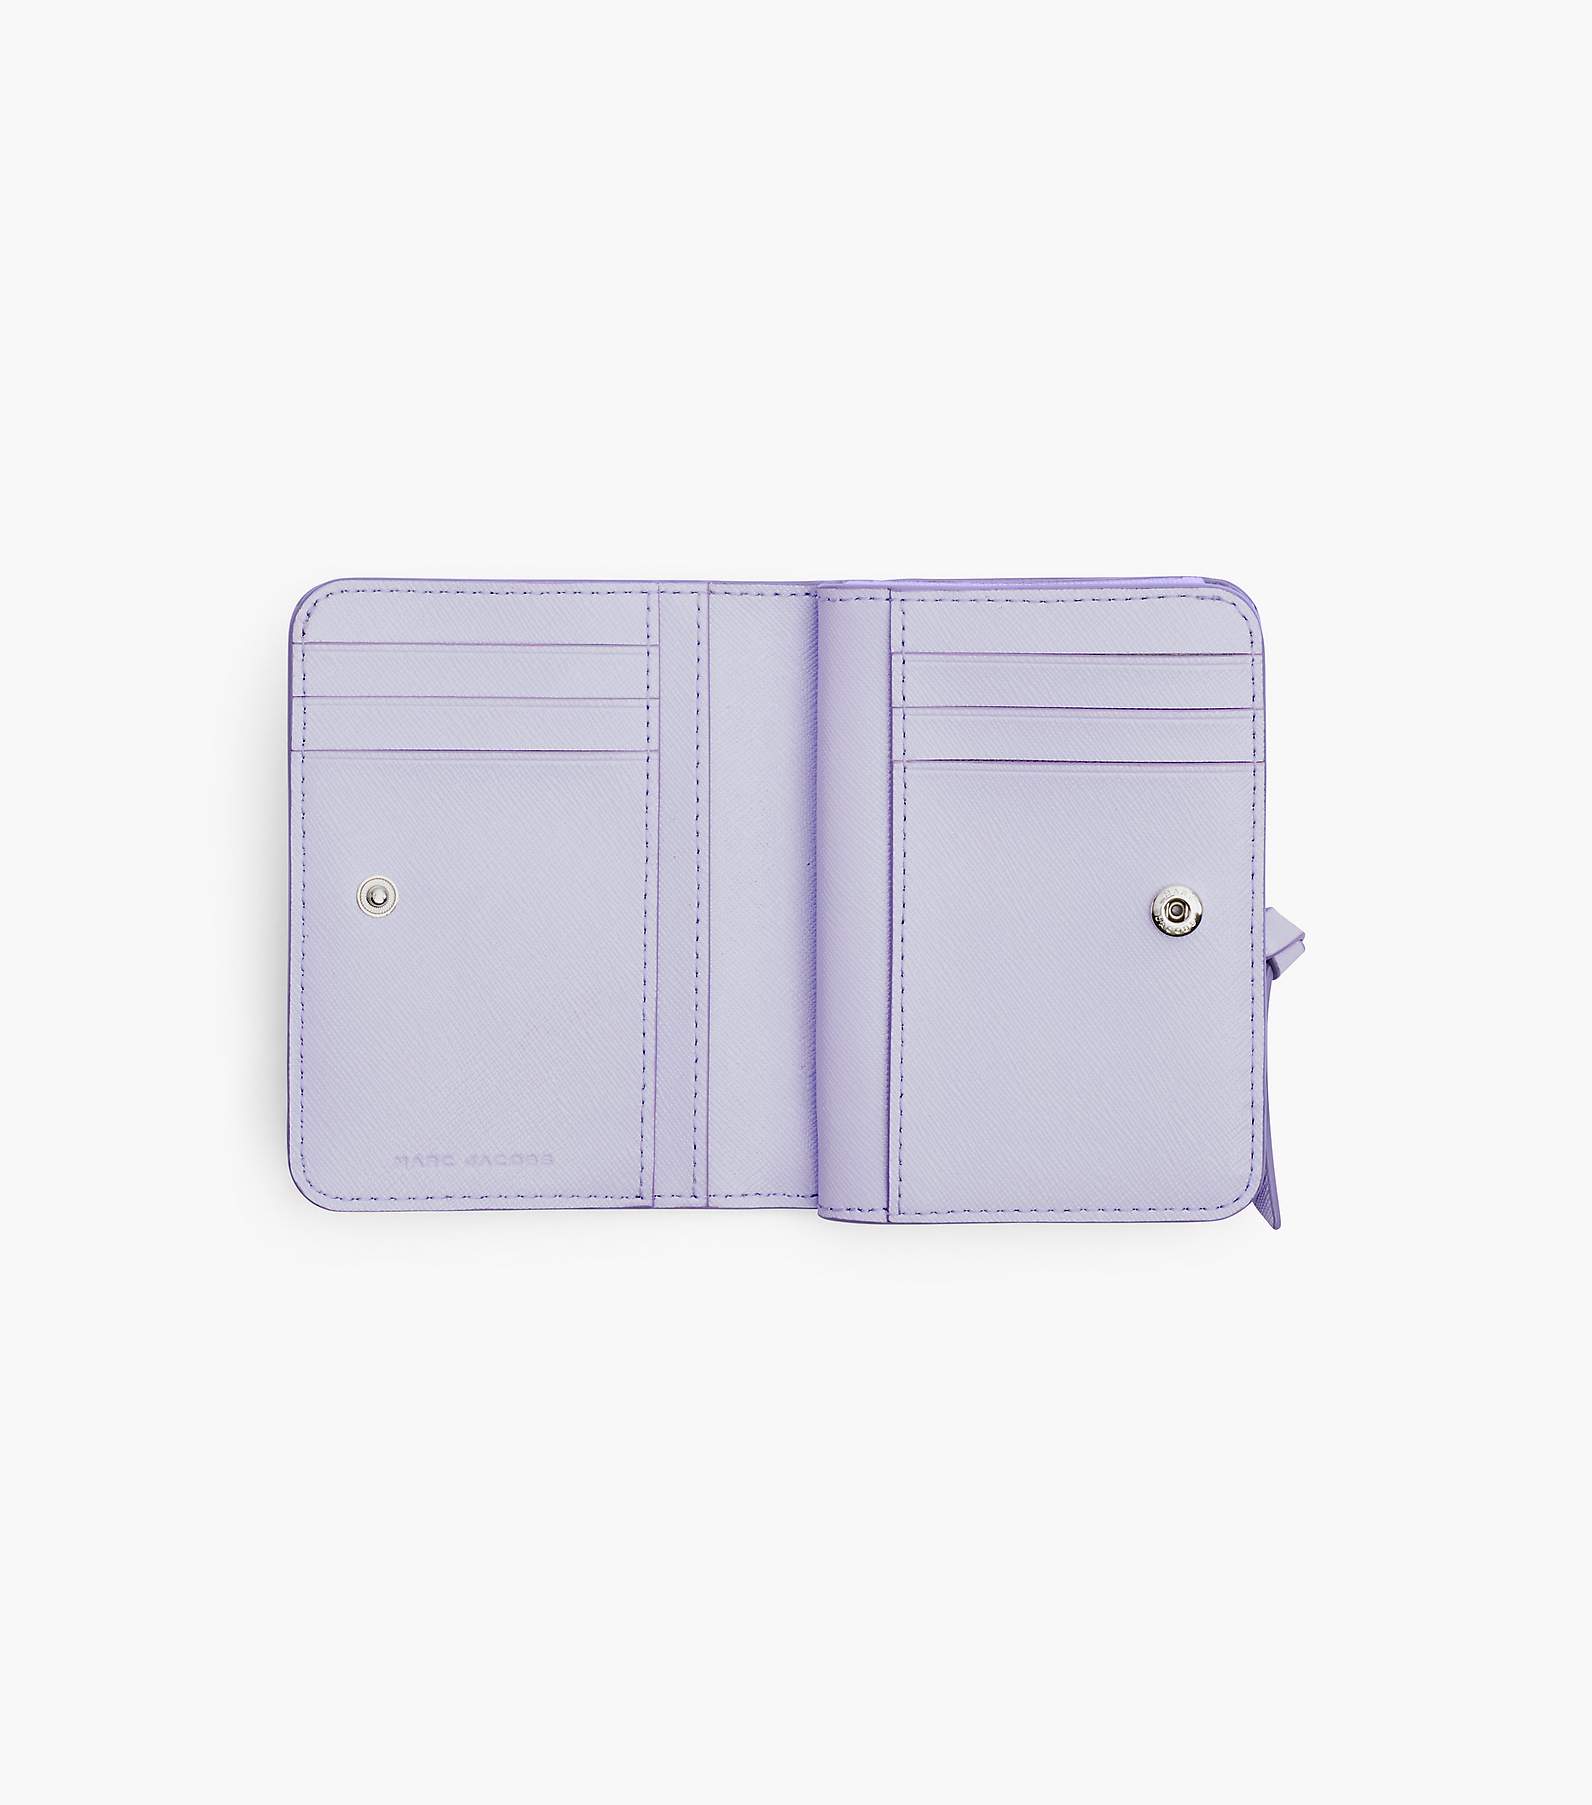 Marc Jacobs The Utility Snapshot Mini Compact Wallet